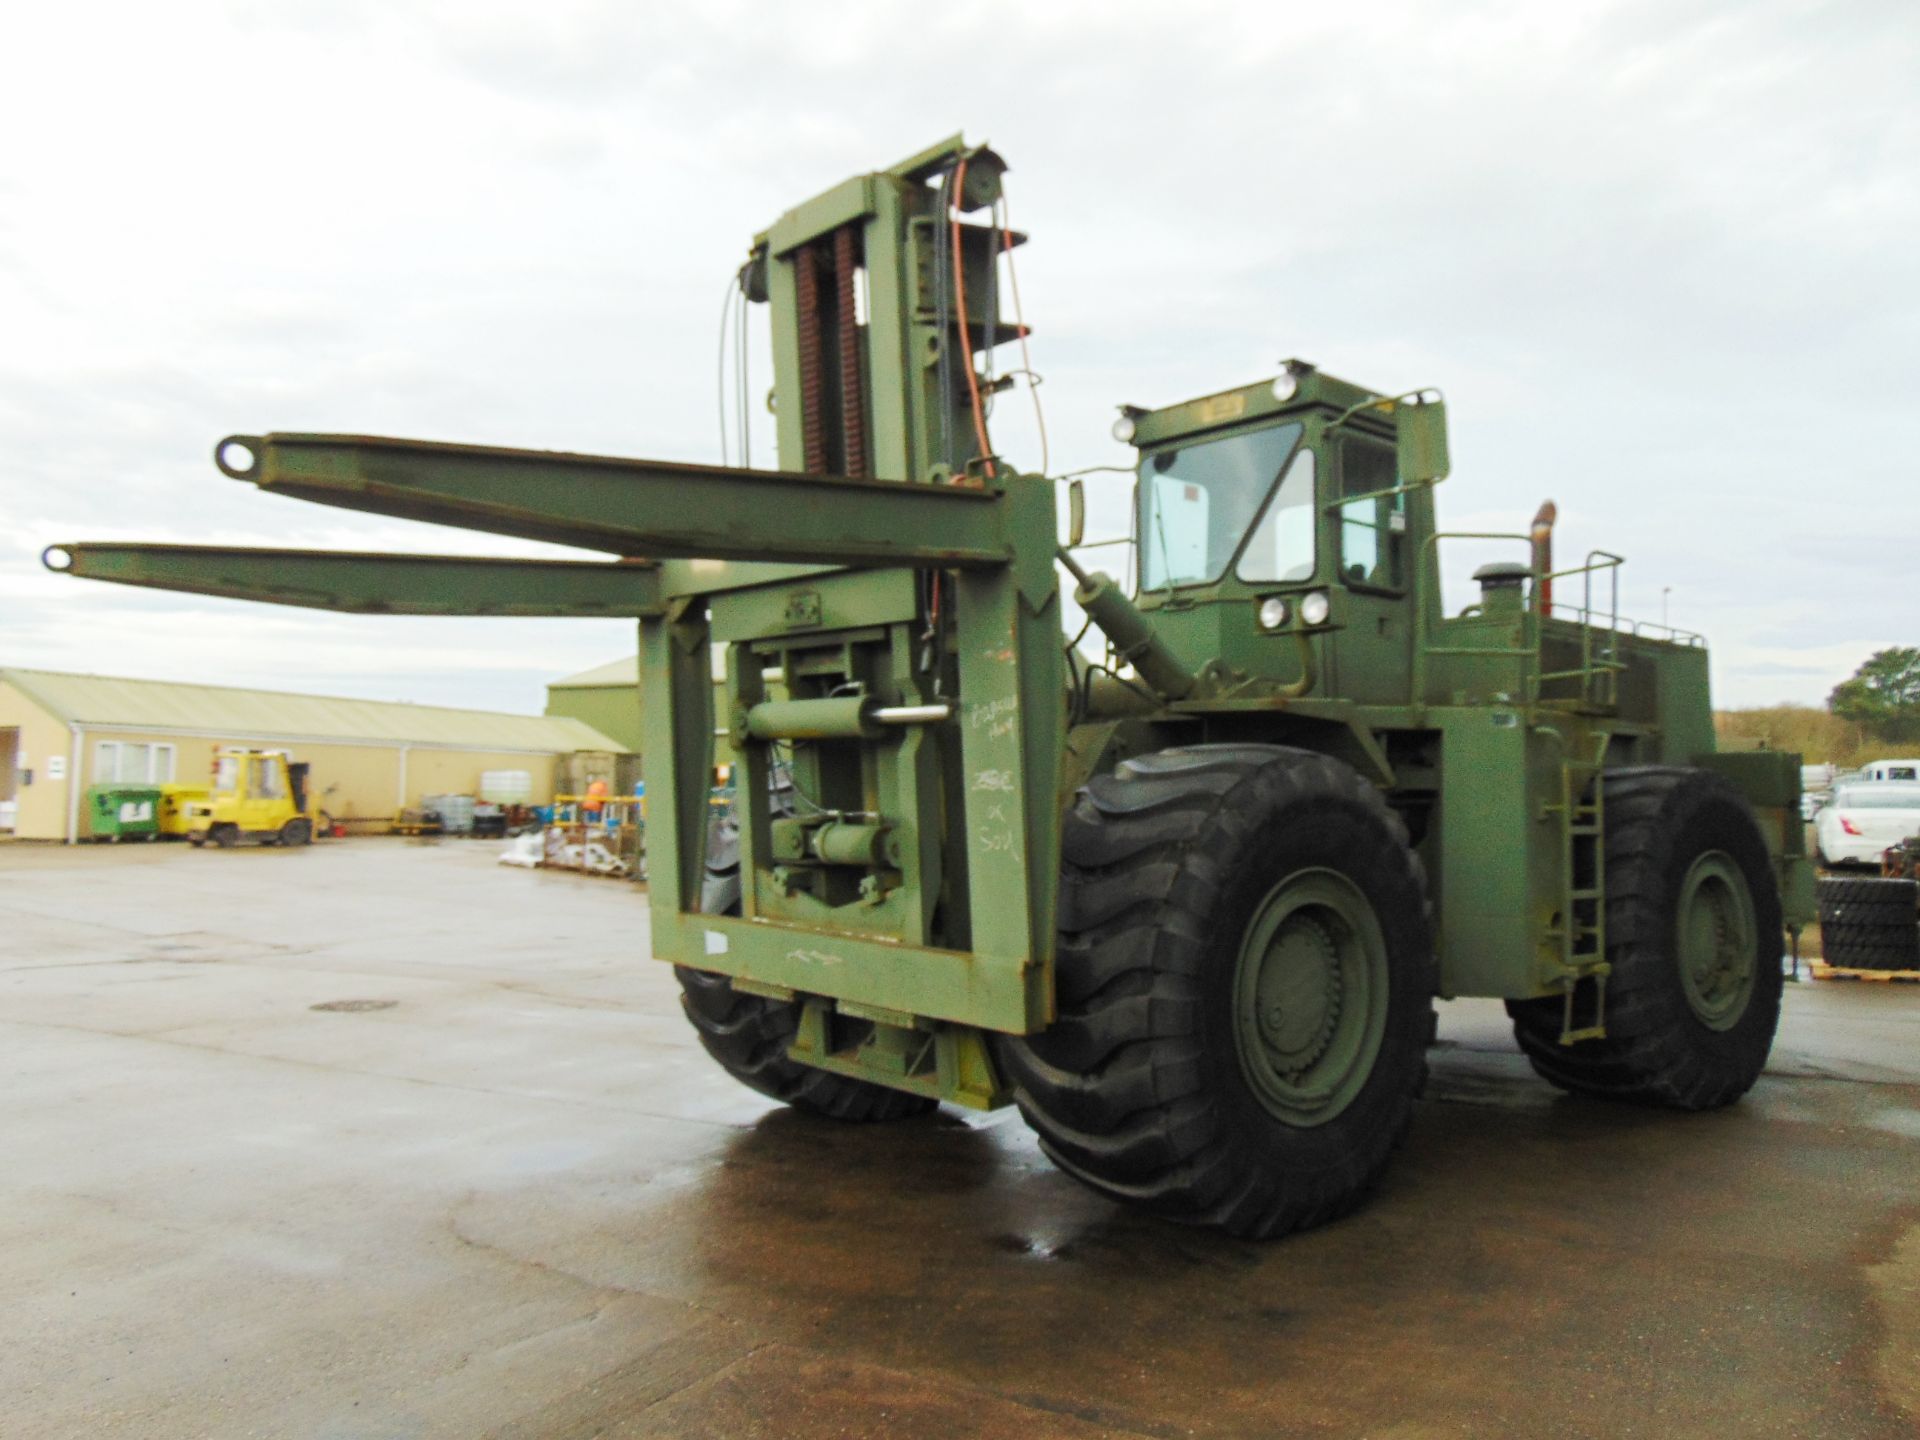 1983 Caterpillar 988B/DV43 50,000lb Rough Terrain Container Handler Forklift ONLY 714 HOURS! - Image 6 of 32